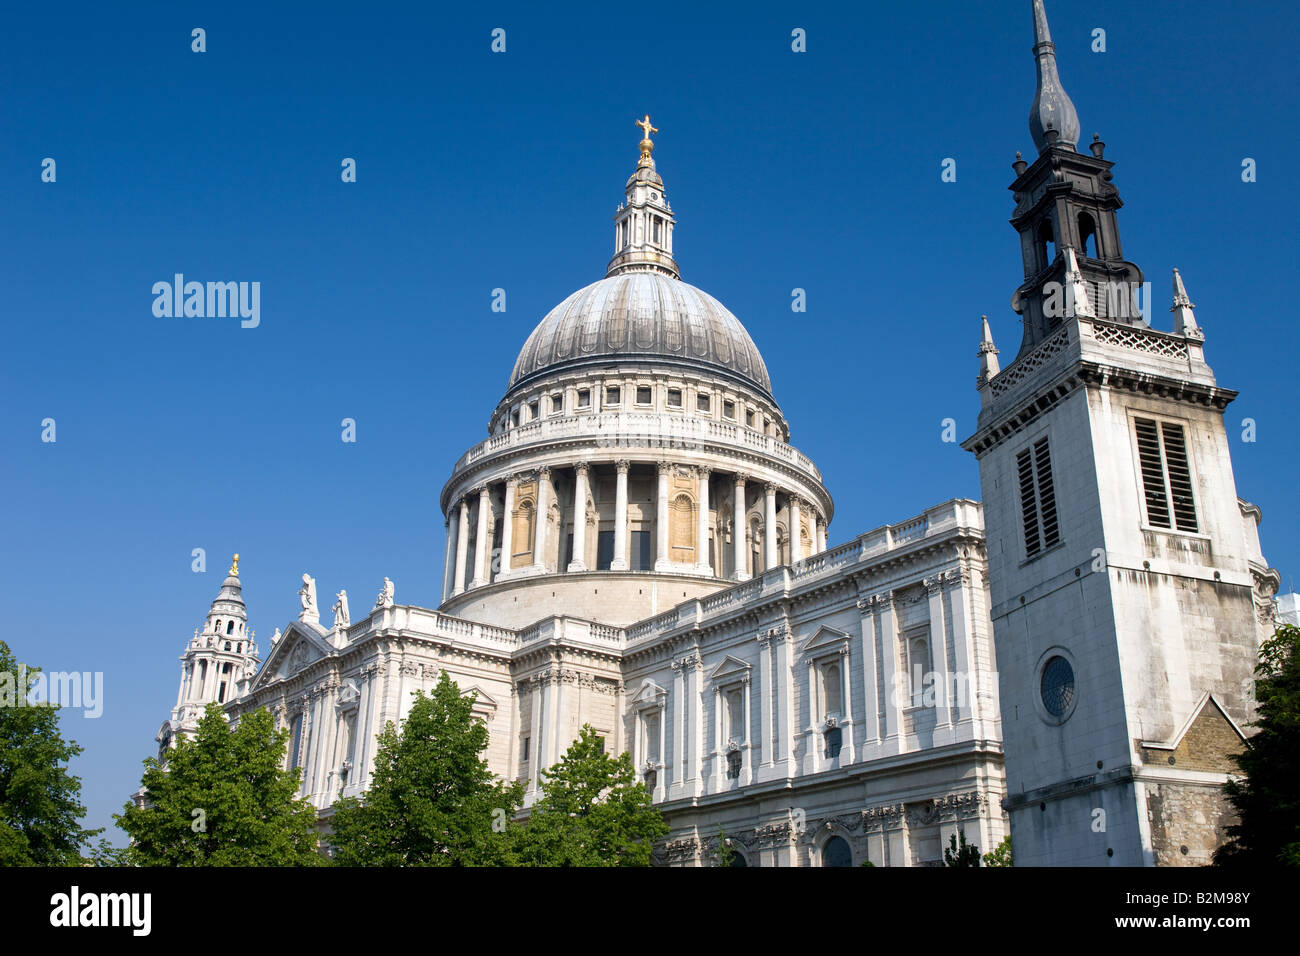 SAINT PAUL'S CATHEDRAL CITY OF LONDON ENGLAND UK Banque D'Images